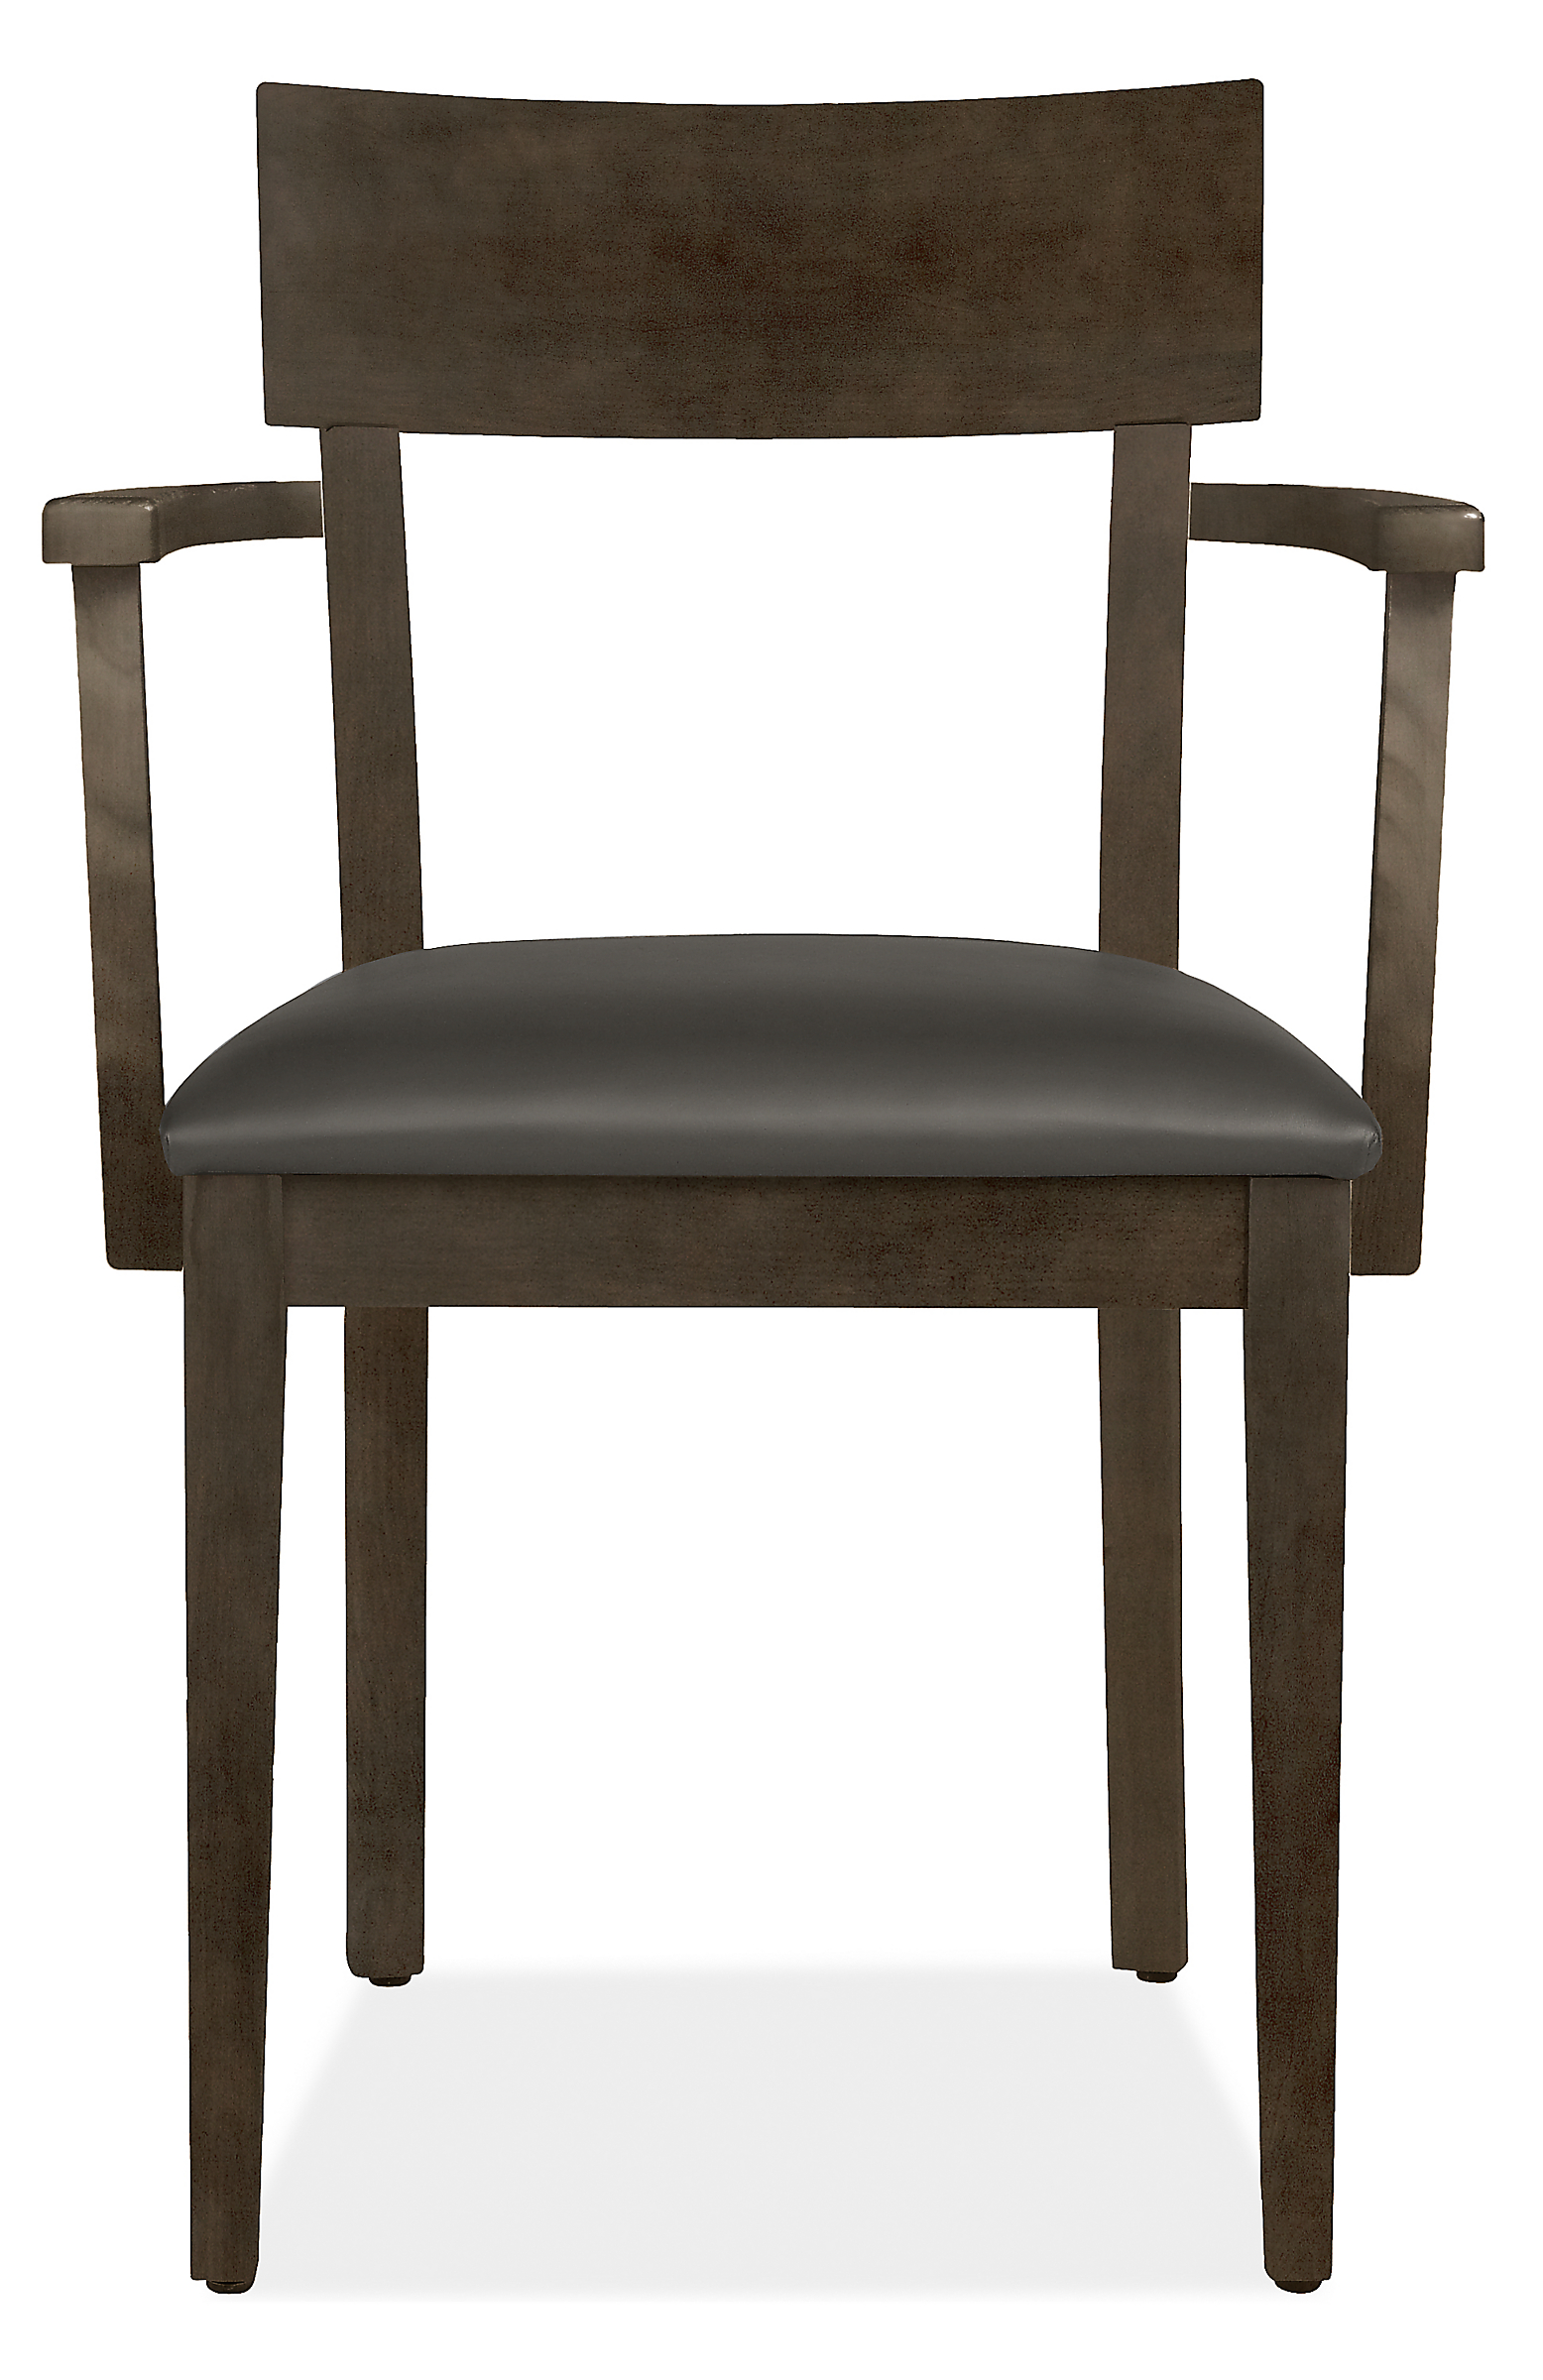 Front view of Doyle Arm Chair in Pistel Leather.